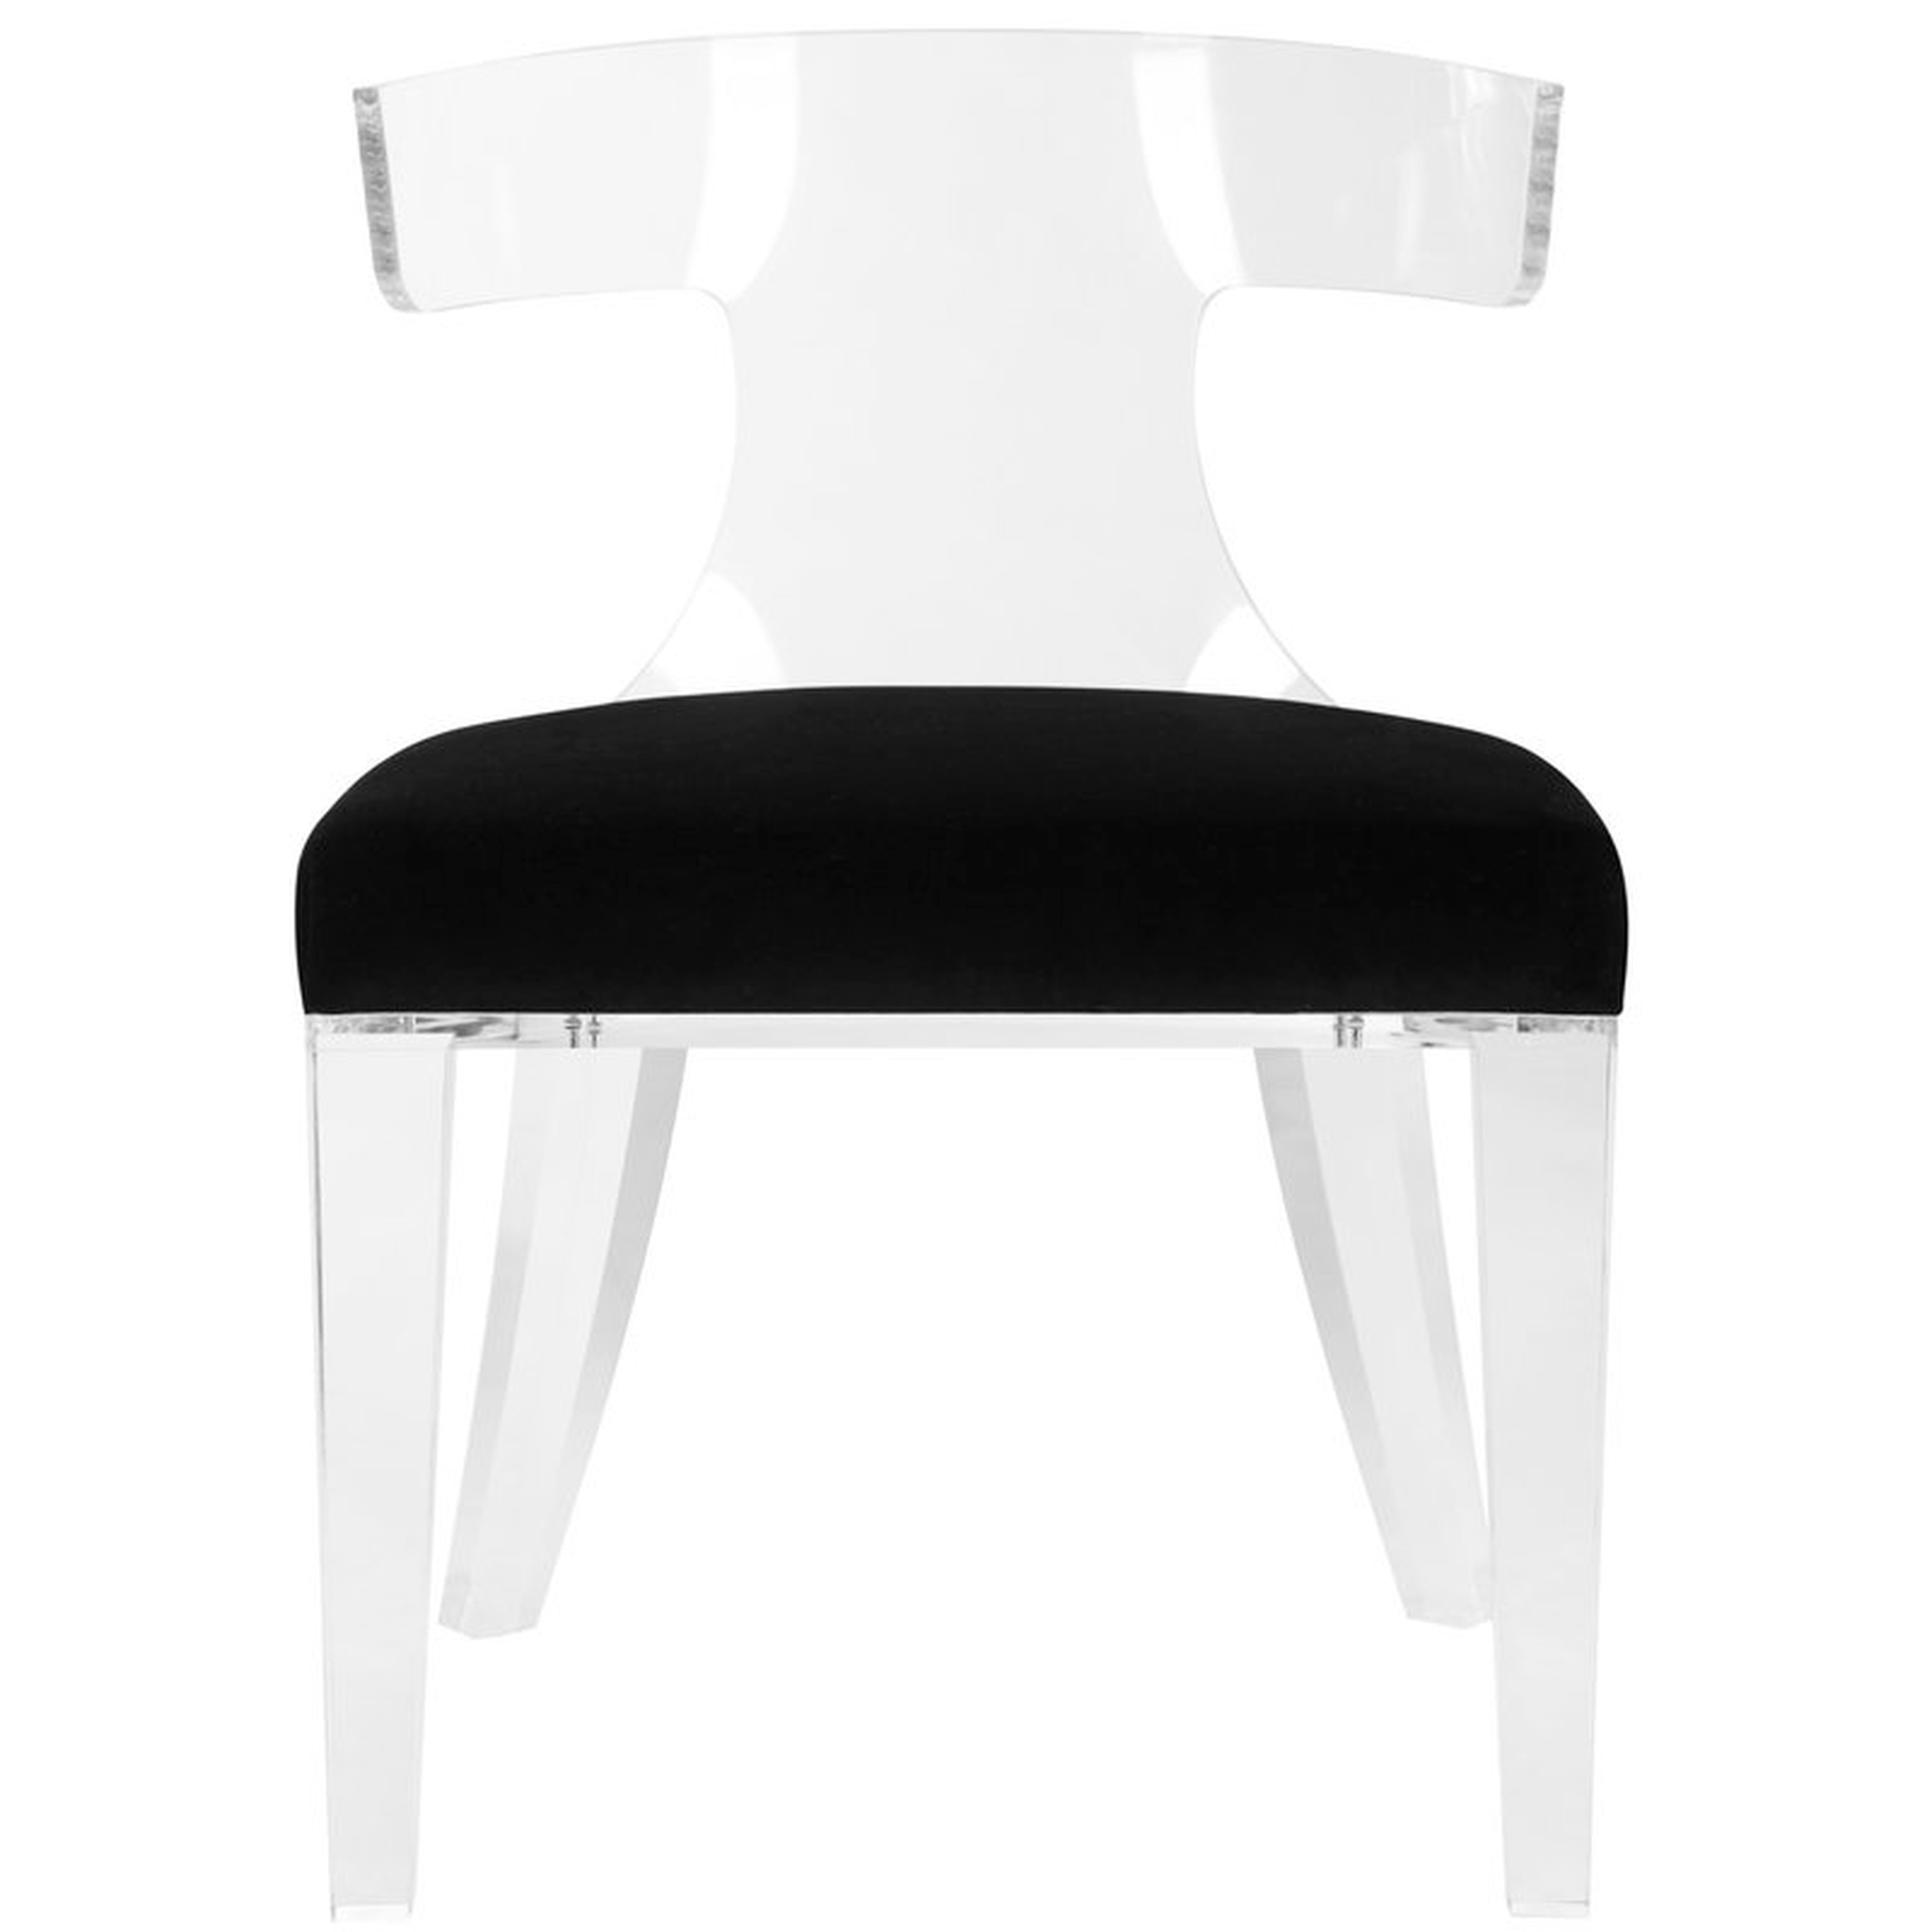 RHYS LUCITE UPHOLSTERED DINING CHAIR - Perigold